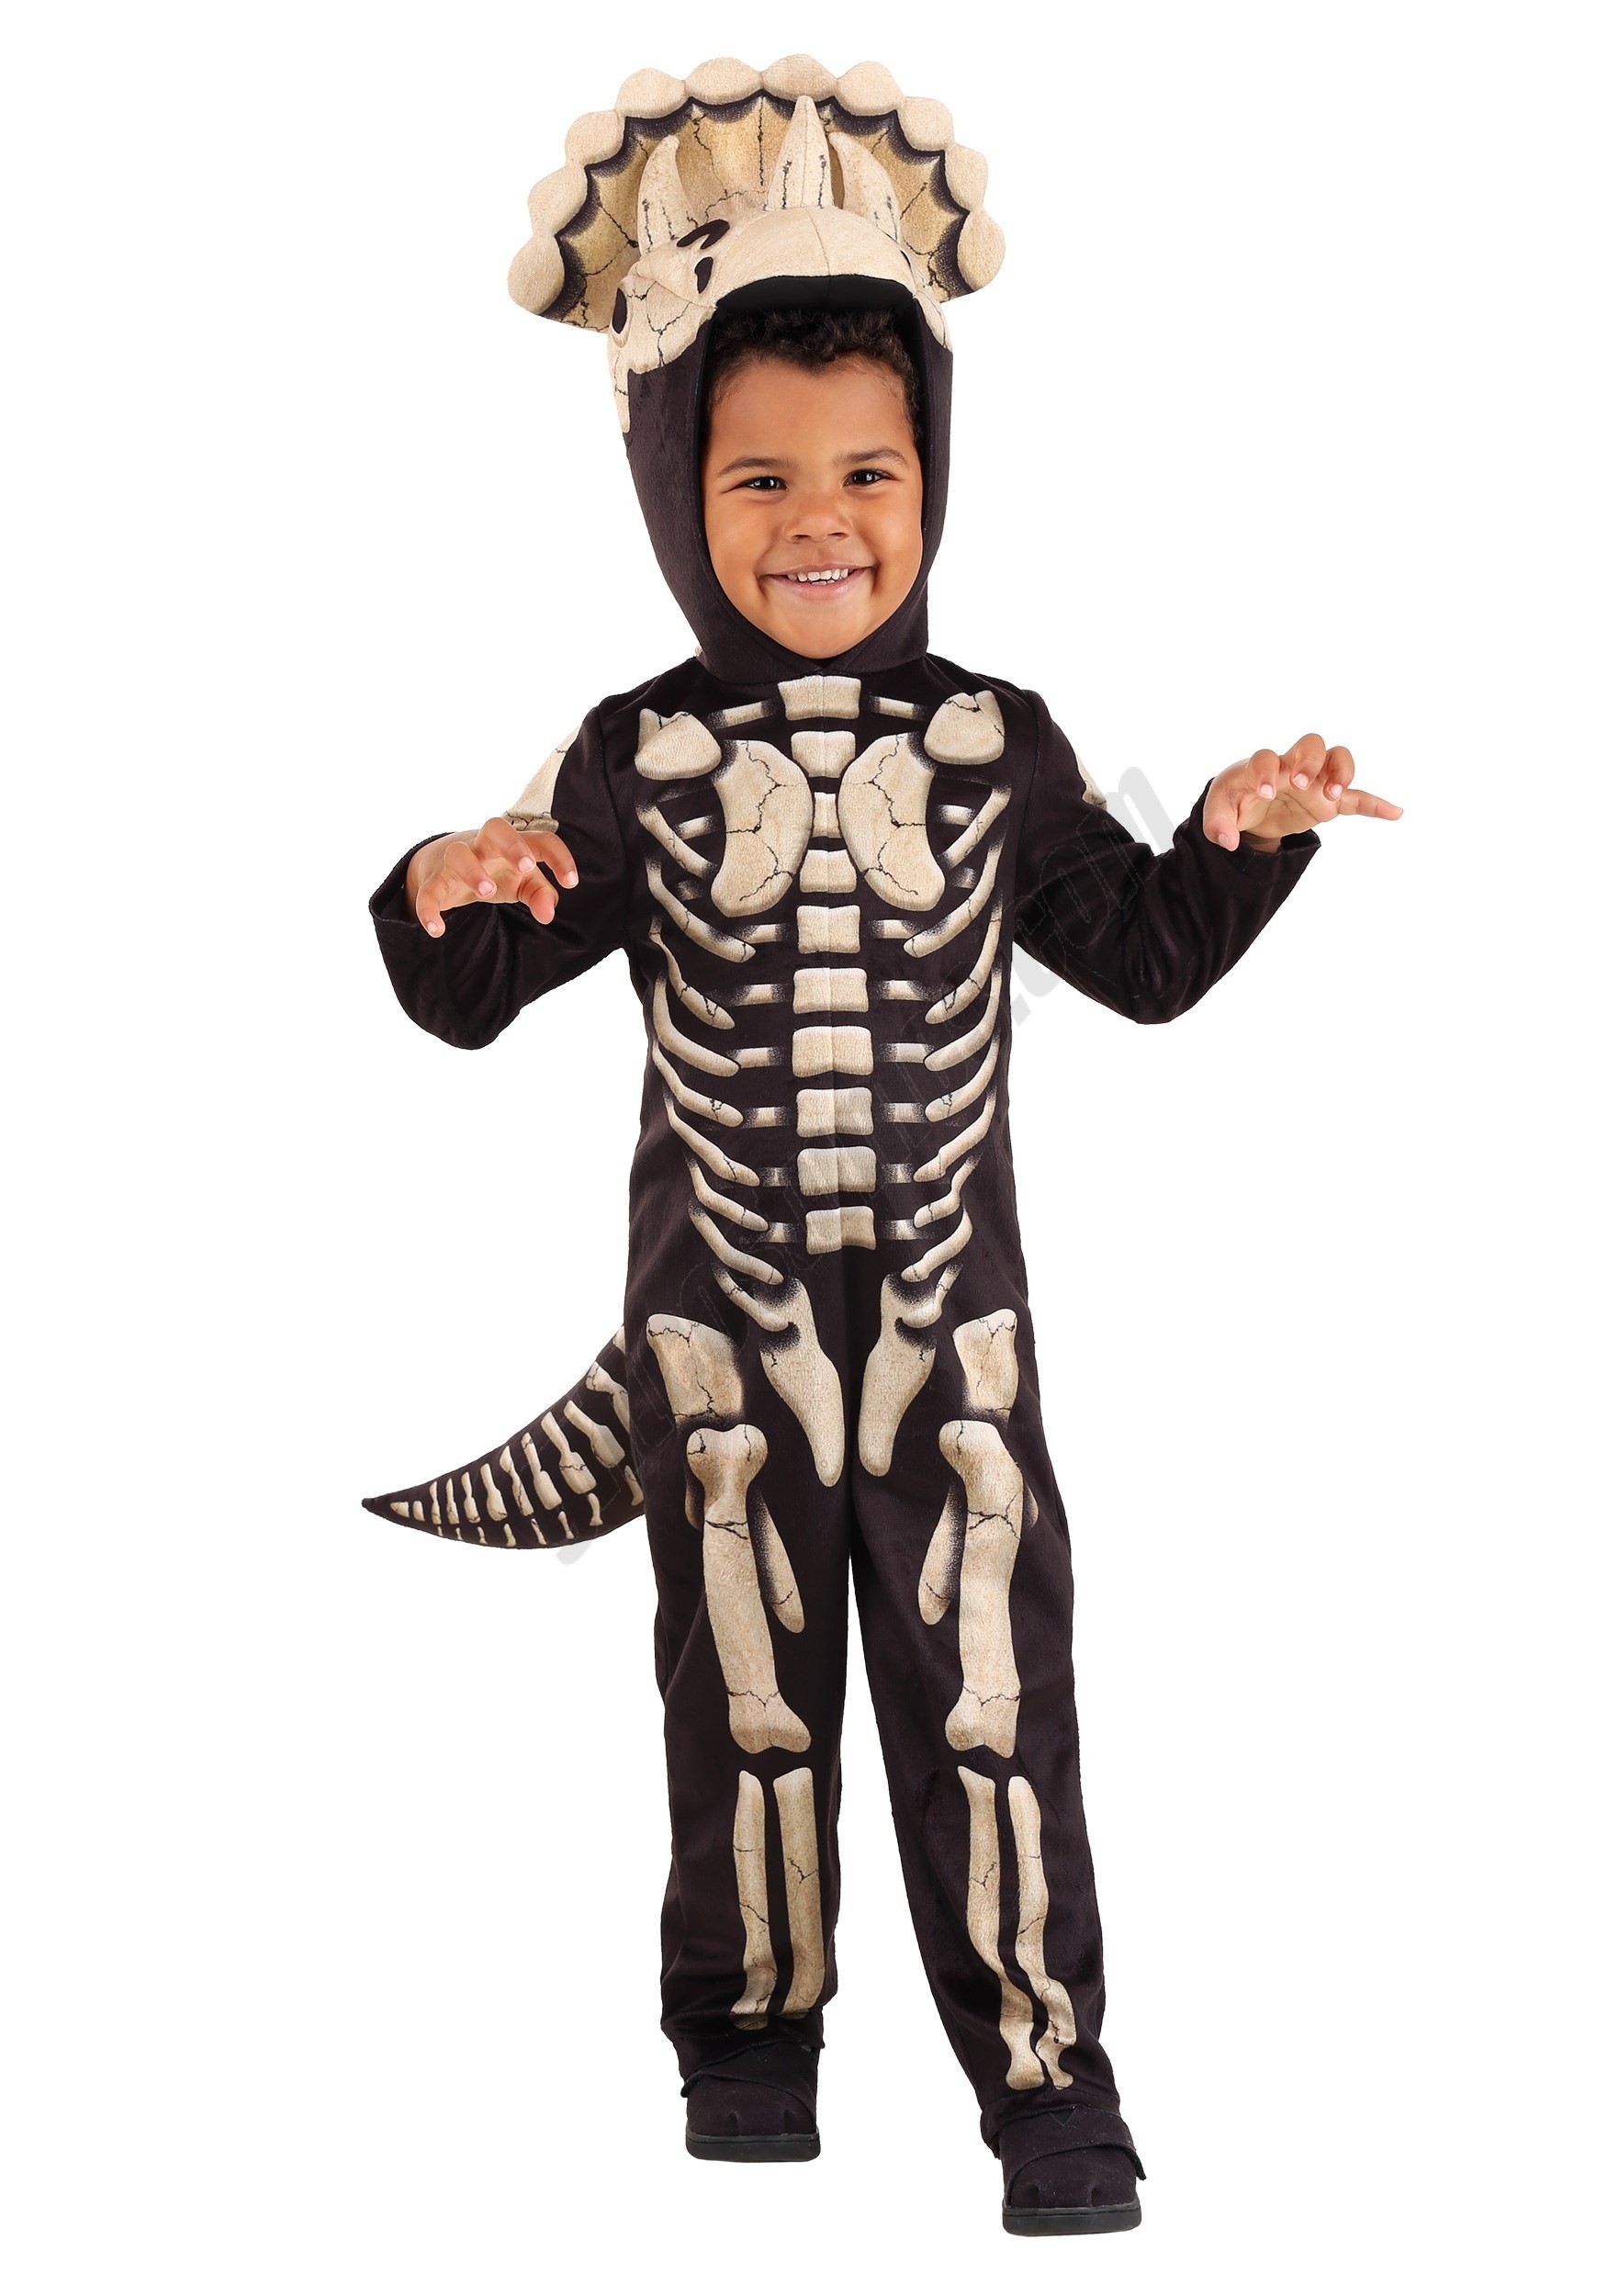 Triceratops Fossil Costume for Toddlers Promotions - Triceratops Fossil Costume for Toddlers Promotions